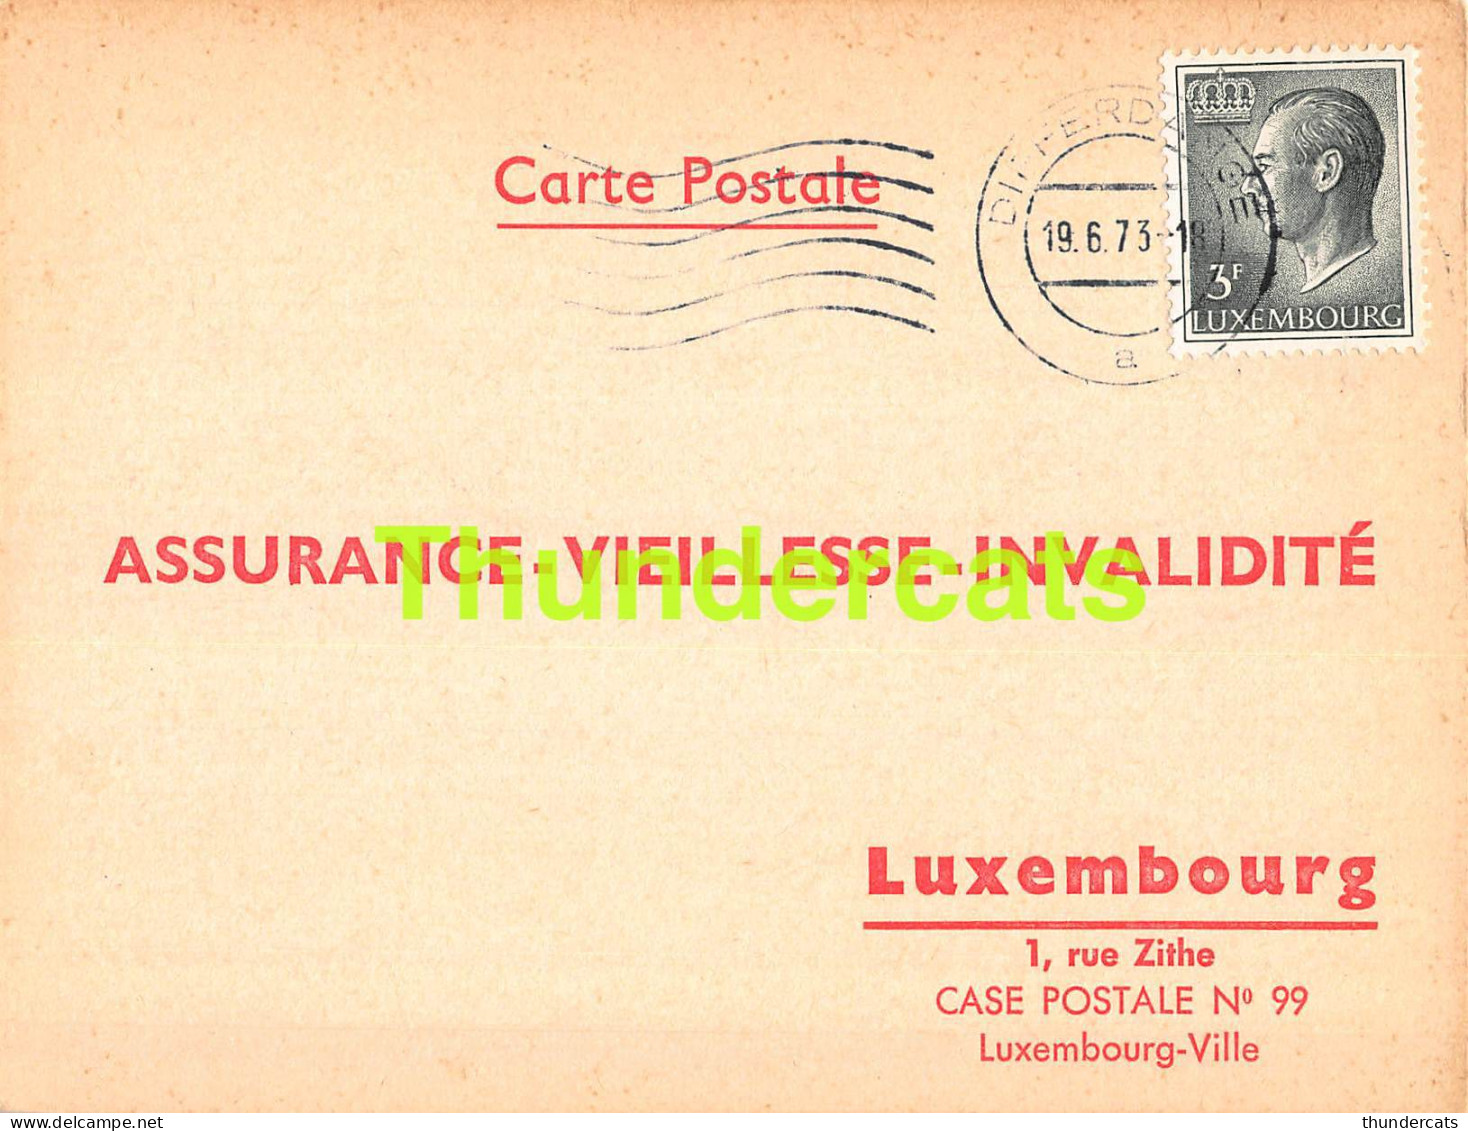 ASSURANCE VIEILLESSE INVALIDITE LUXEMBOURG 1973 WELTER GILLEN DIFFERDANGE  - Covers & Documents